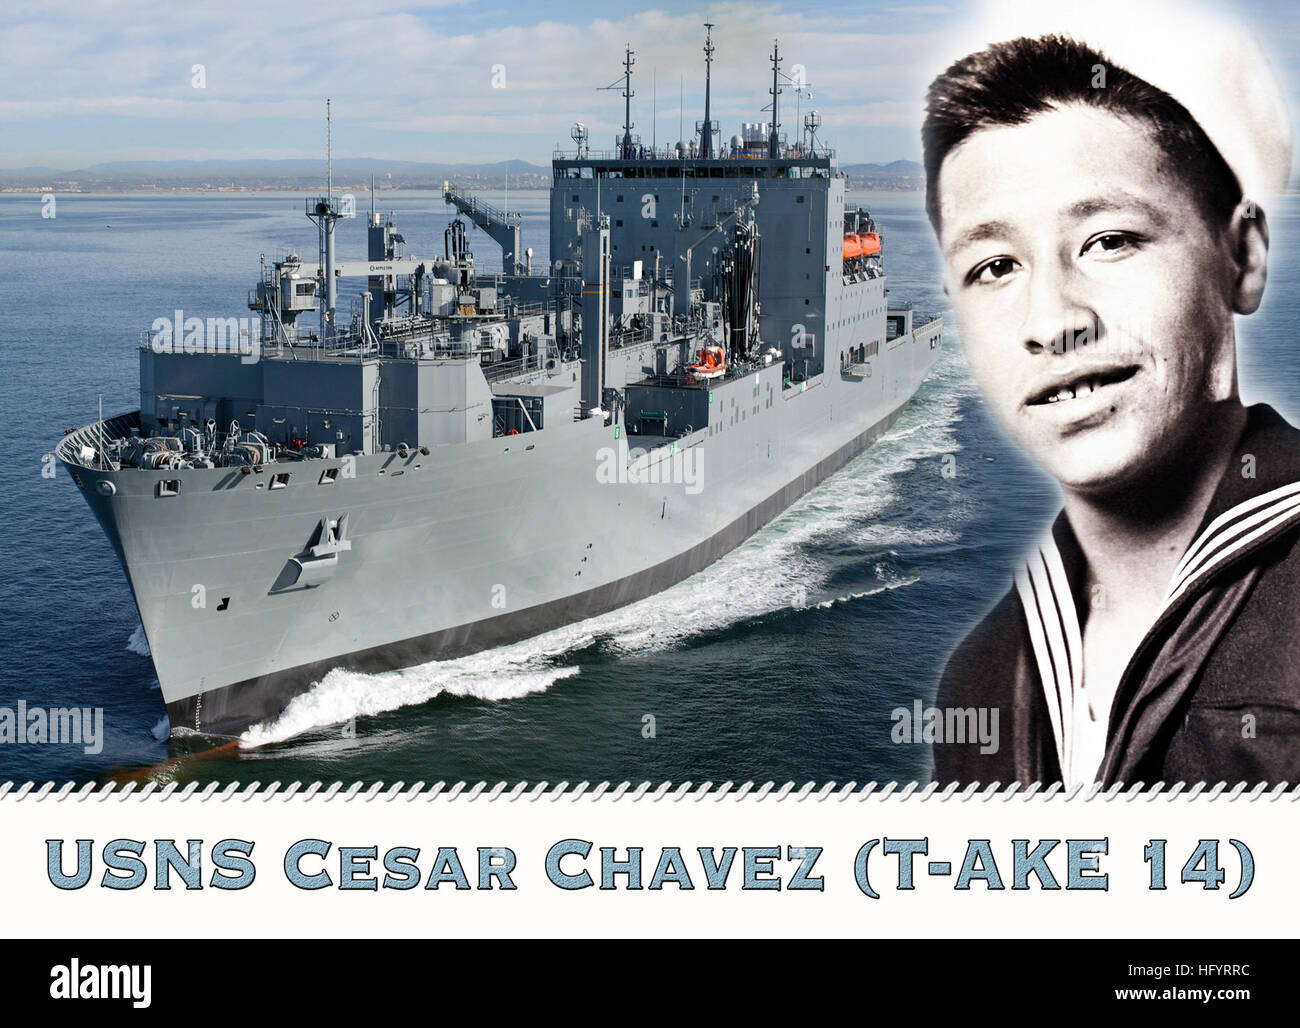 110512-N-DX698-001 WASHINGTON (May 12, 2011) A photo illustration of the Military Sealift Command dry cargo and ammunition ship USNS Cesar Chavez (T-AKE 14). Chavez served in the Navy from 1944-1946 and became a leader in the American labor movement and a civil rights activist. Cesar Chavez will serve as a combat logistics force ship delivering ammunition, food, fuel and other dry cargo to U.S. and allied ships at sea. (U.S. Navy photo illustration by Mass Communication Specialist Jay M. Chu/Released) US Navy 110512-N-DX698-001 A photo illustration of the Military Sealift Command dry cargo and Stock Photo